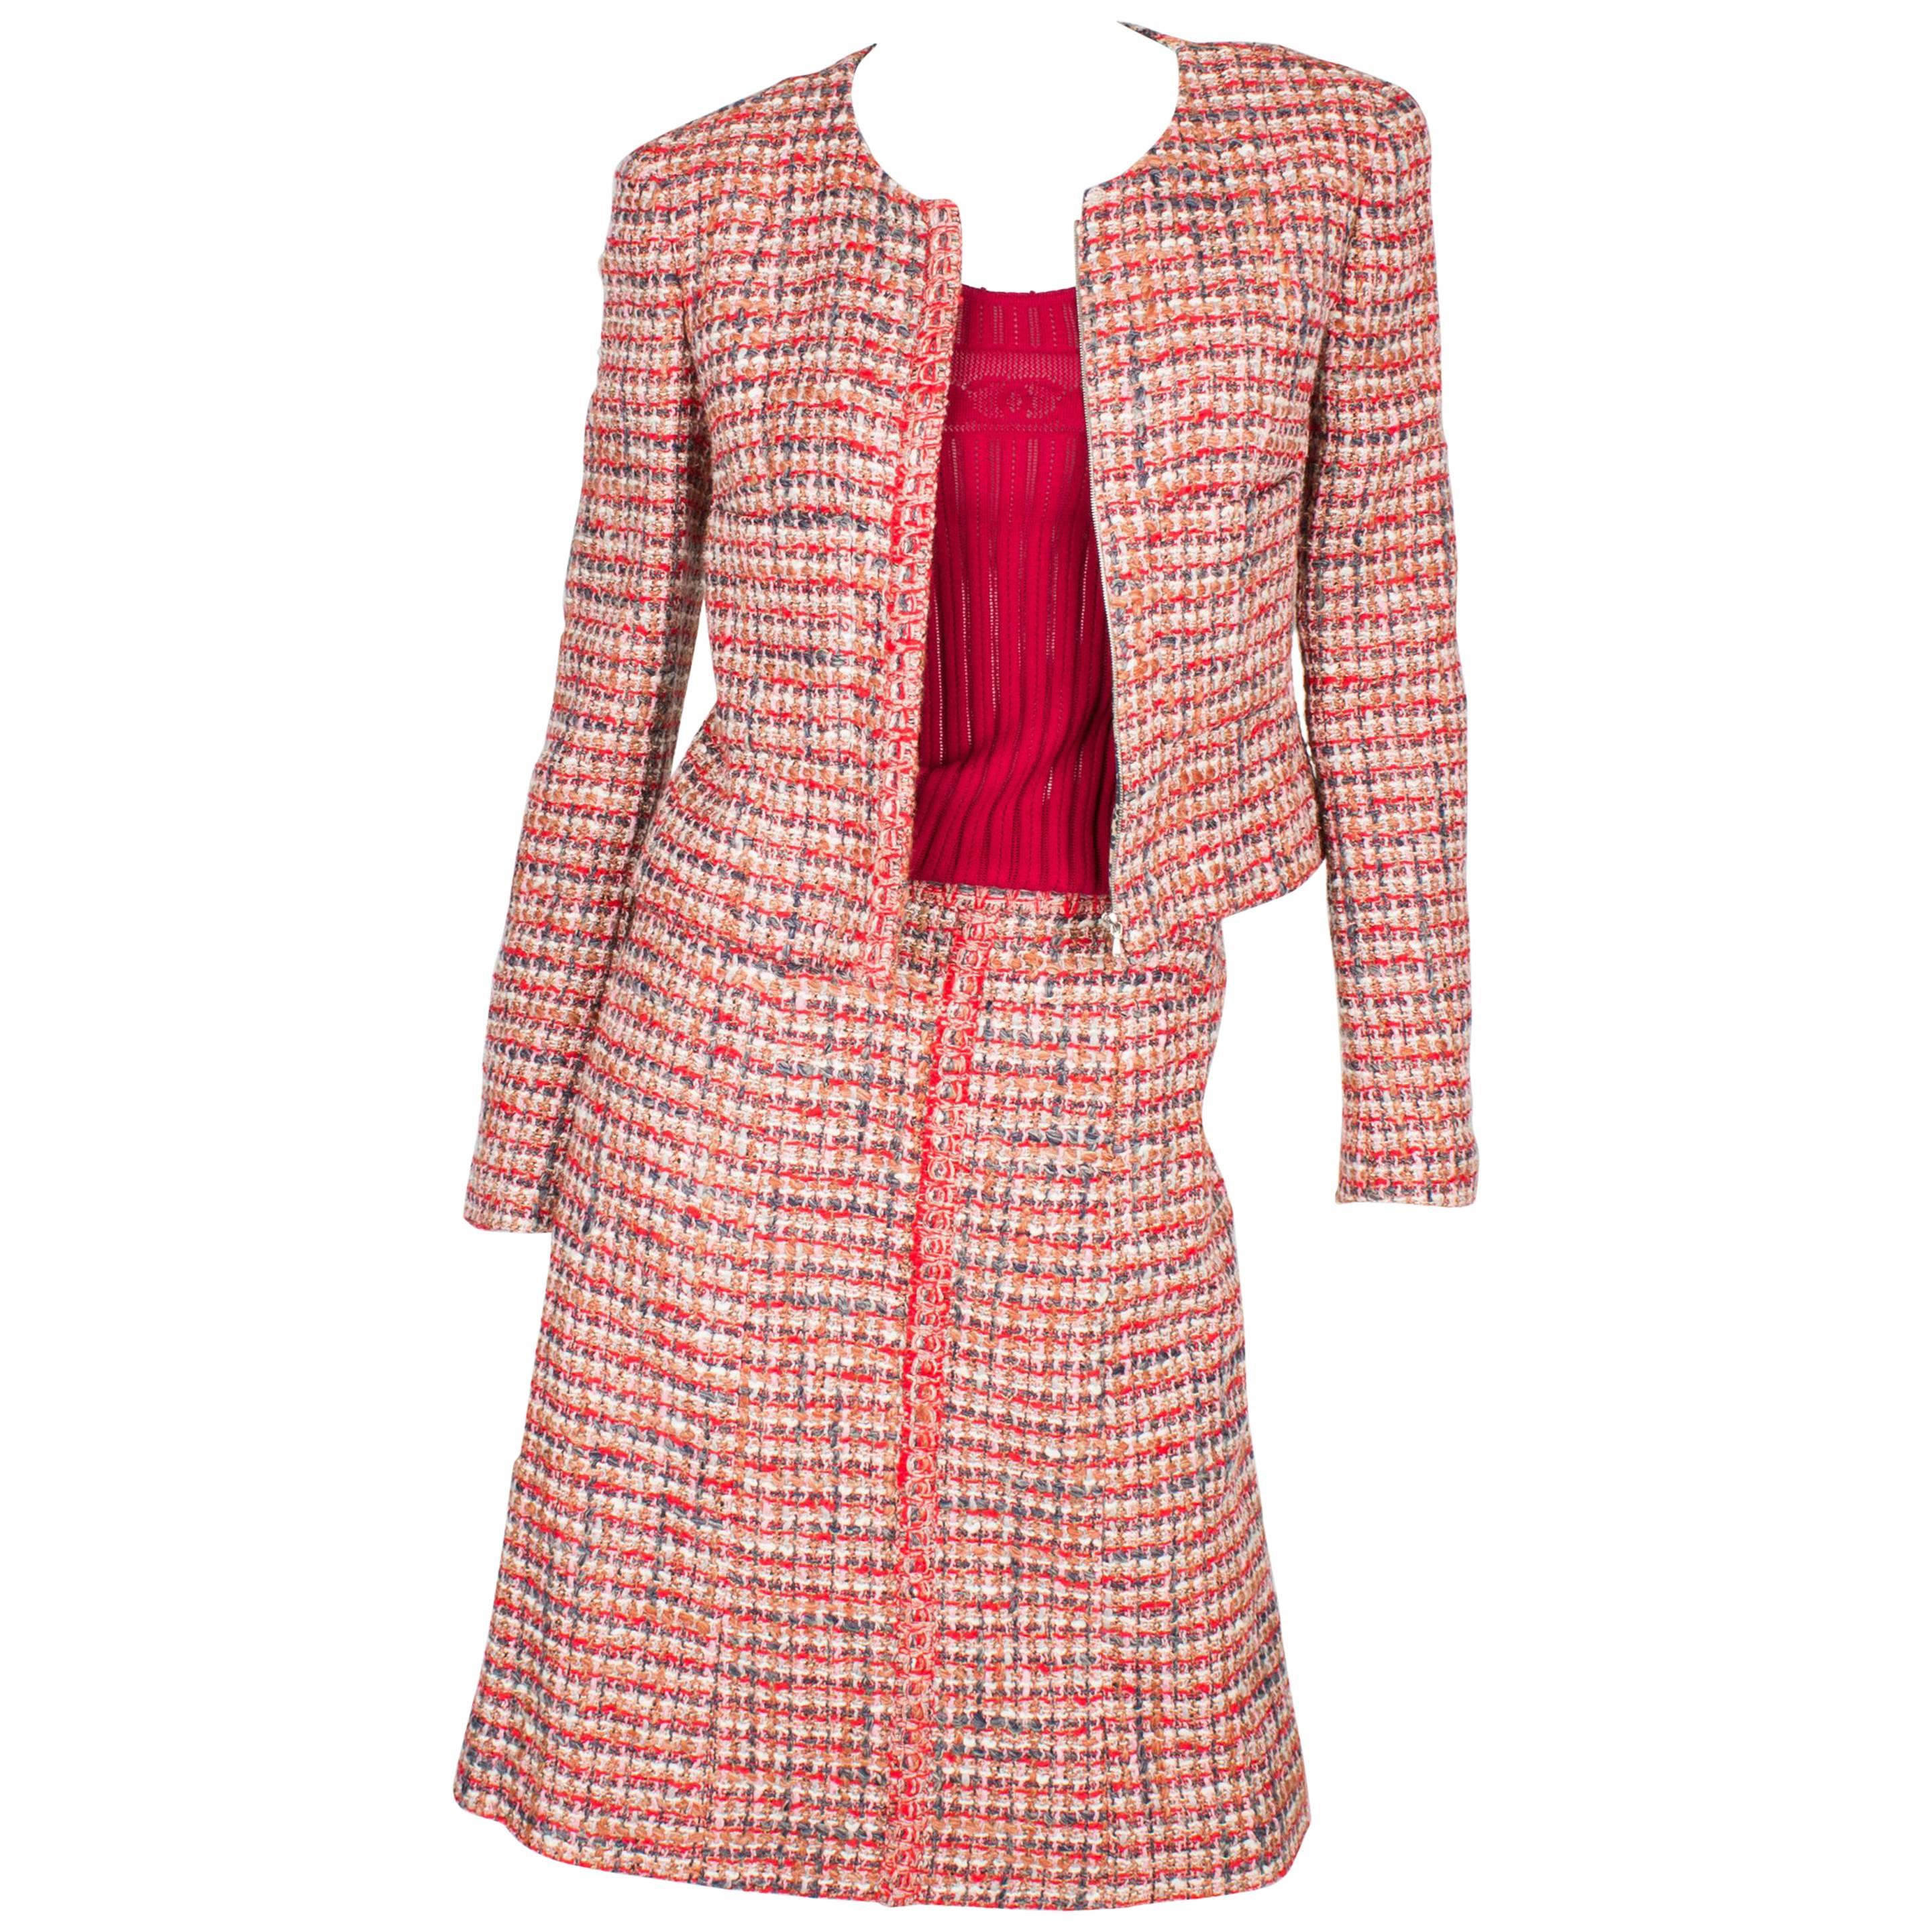 Chanel 3-pcs Suit Jacket, Skirt & Top - red/gray/pink/white 2003